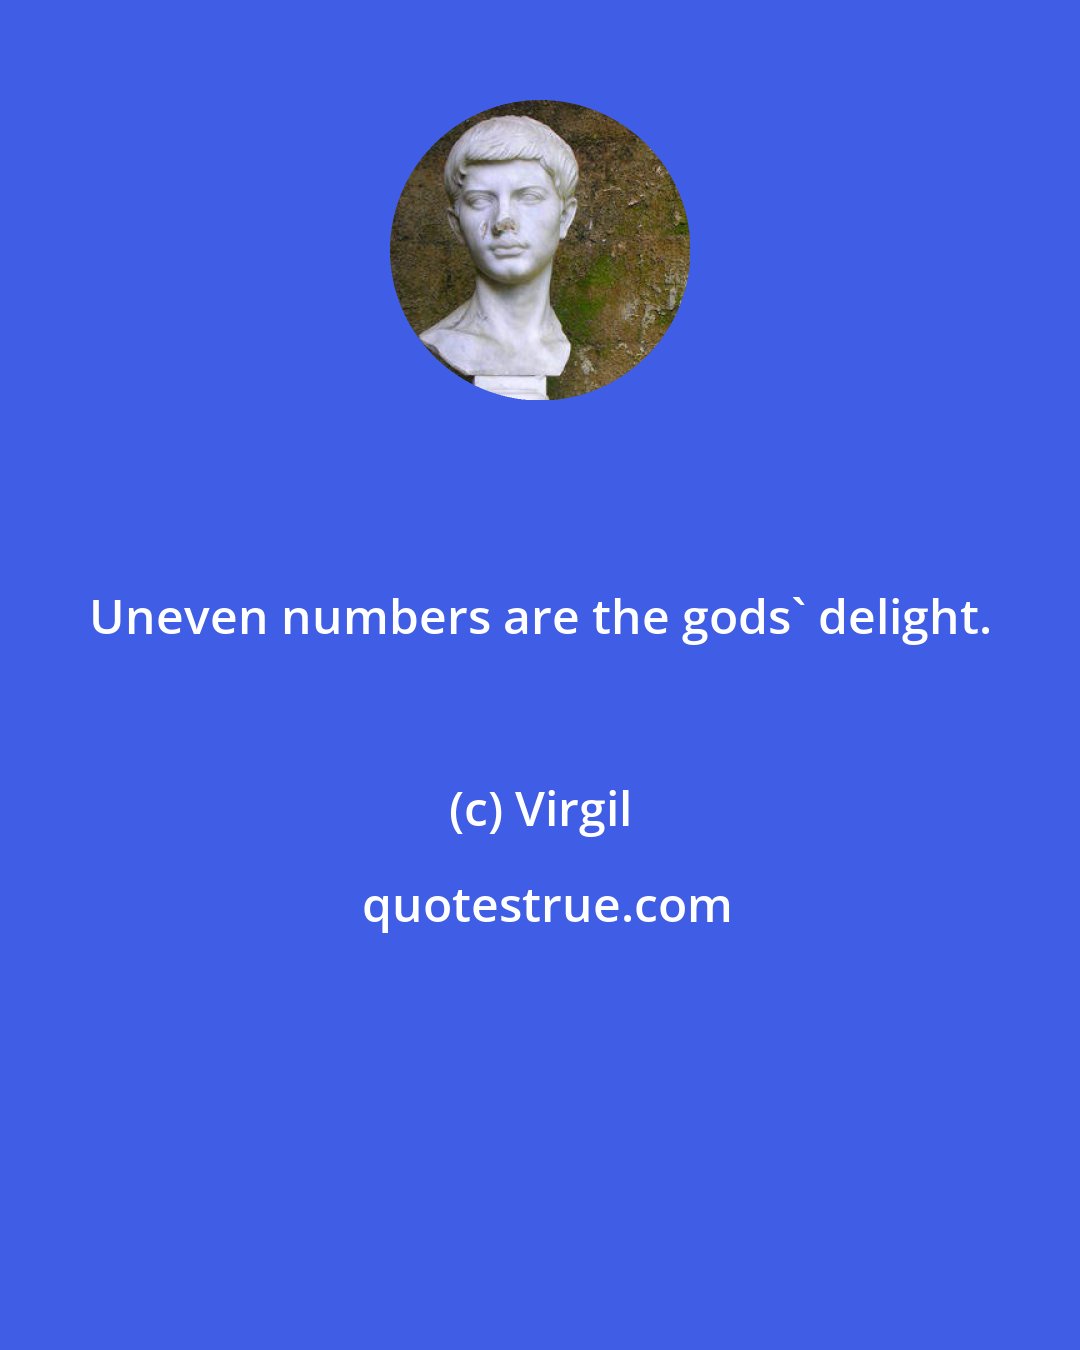 Virgil: Uneven numbers are the gods' delight.